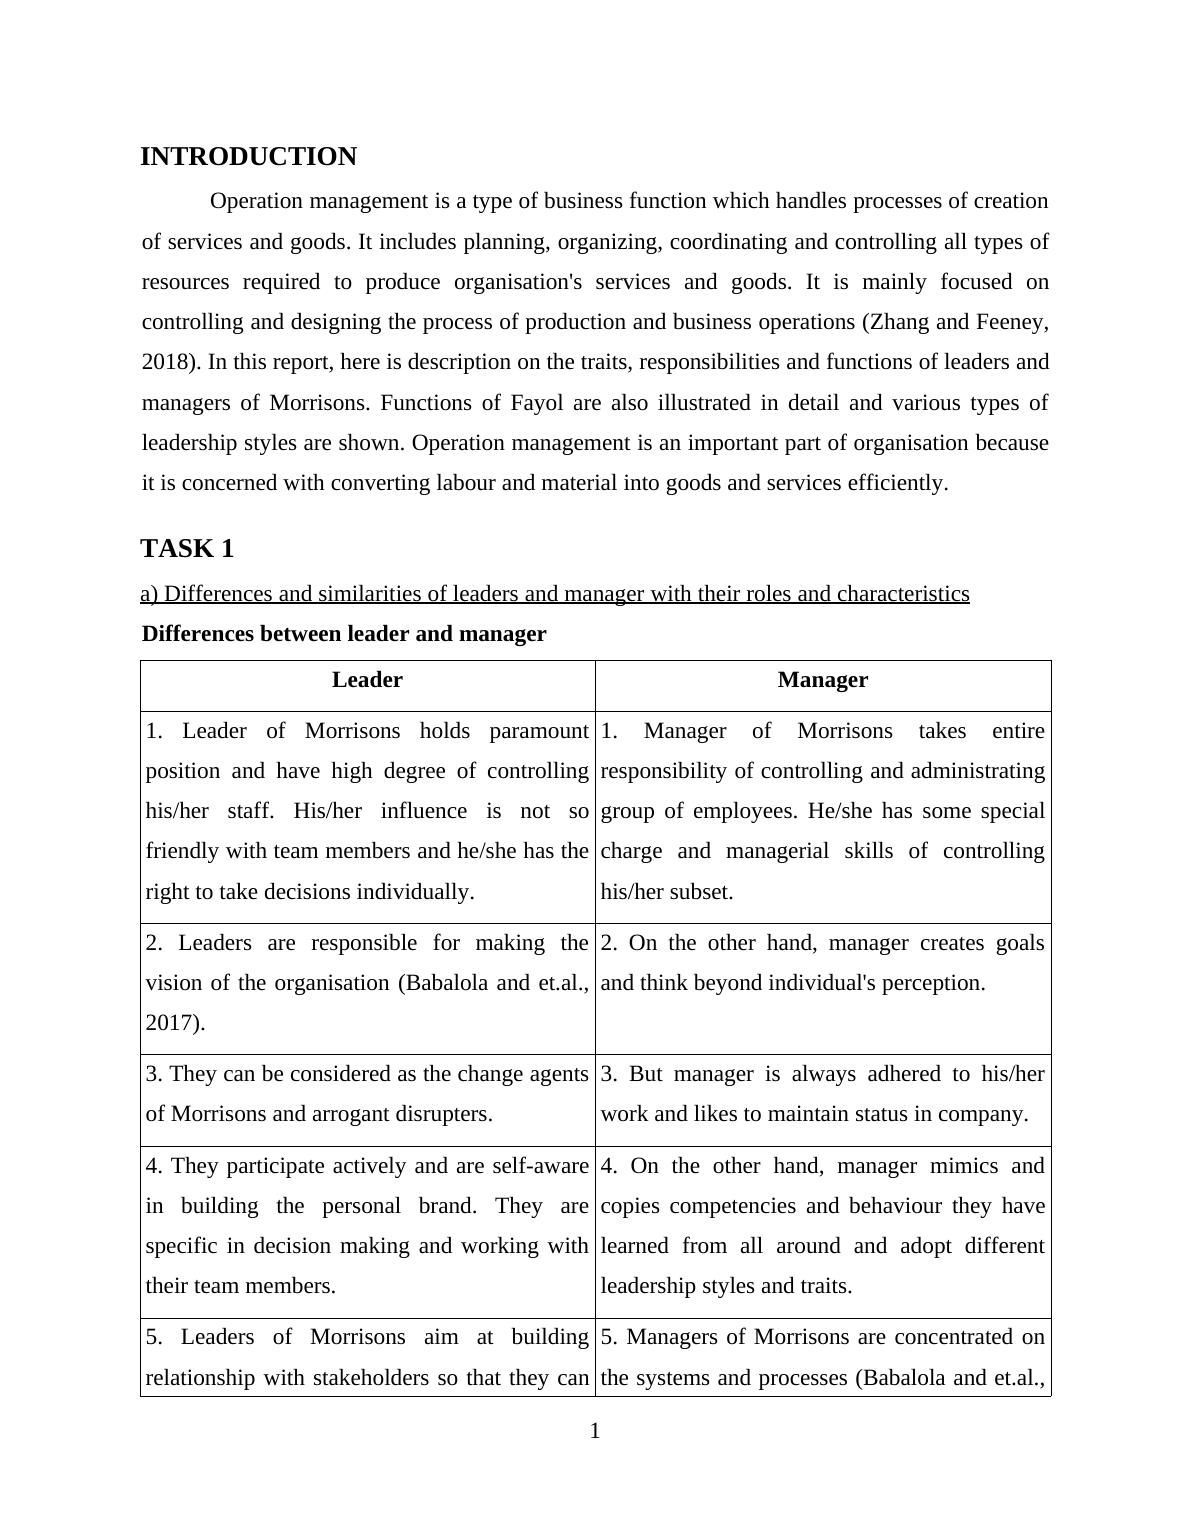 Management and Operations Assignment - Morrisons_3